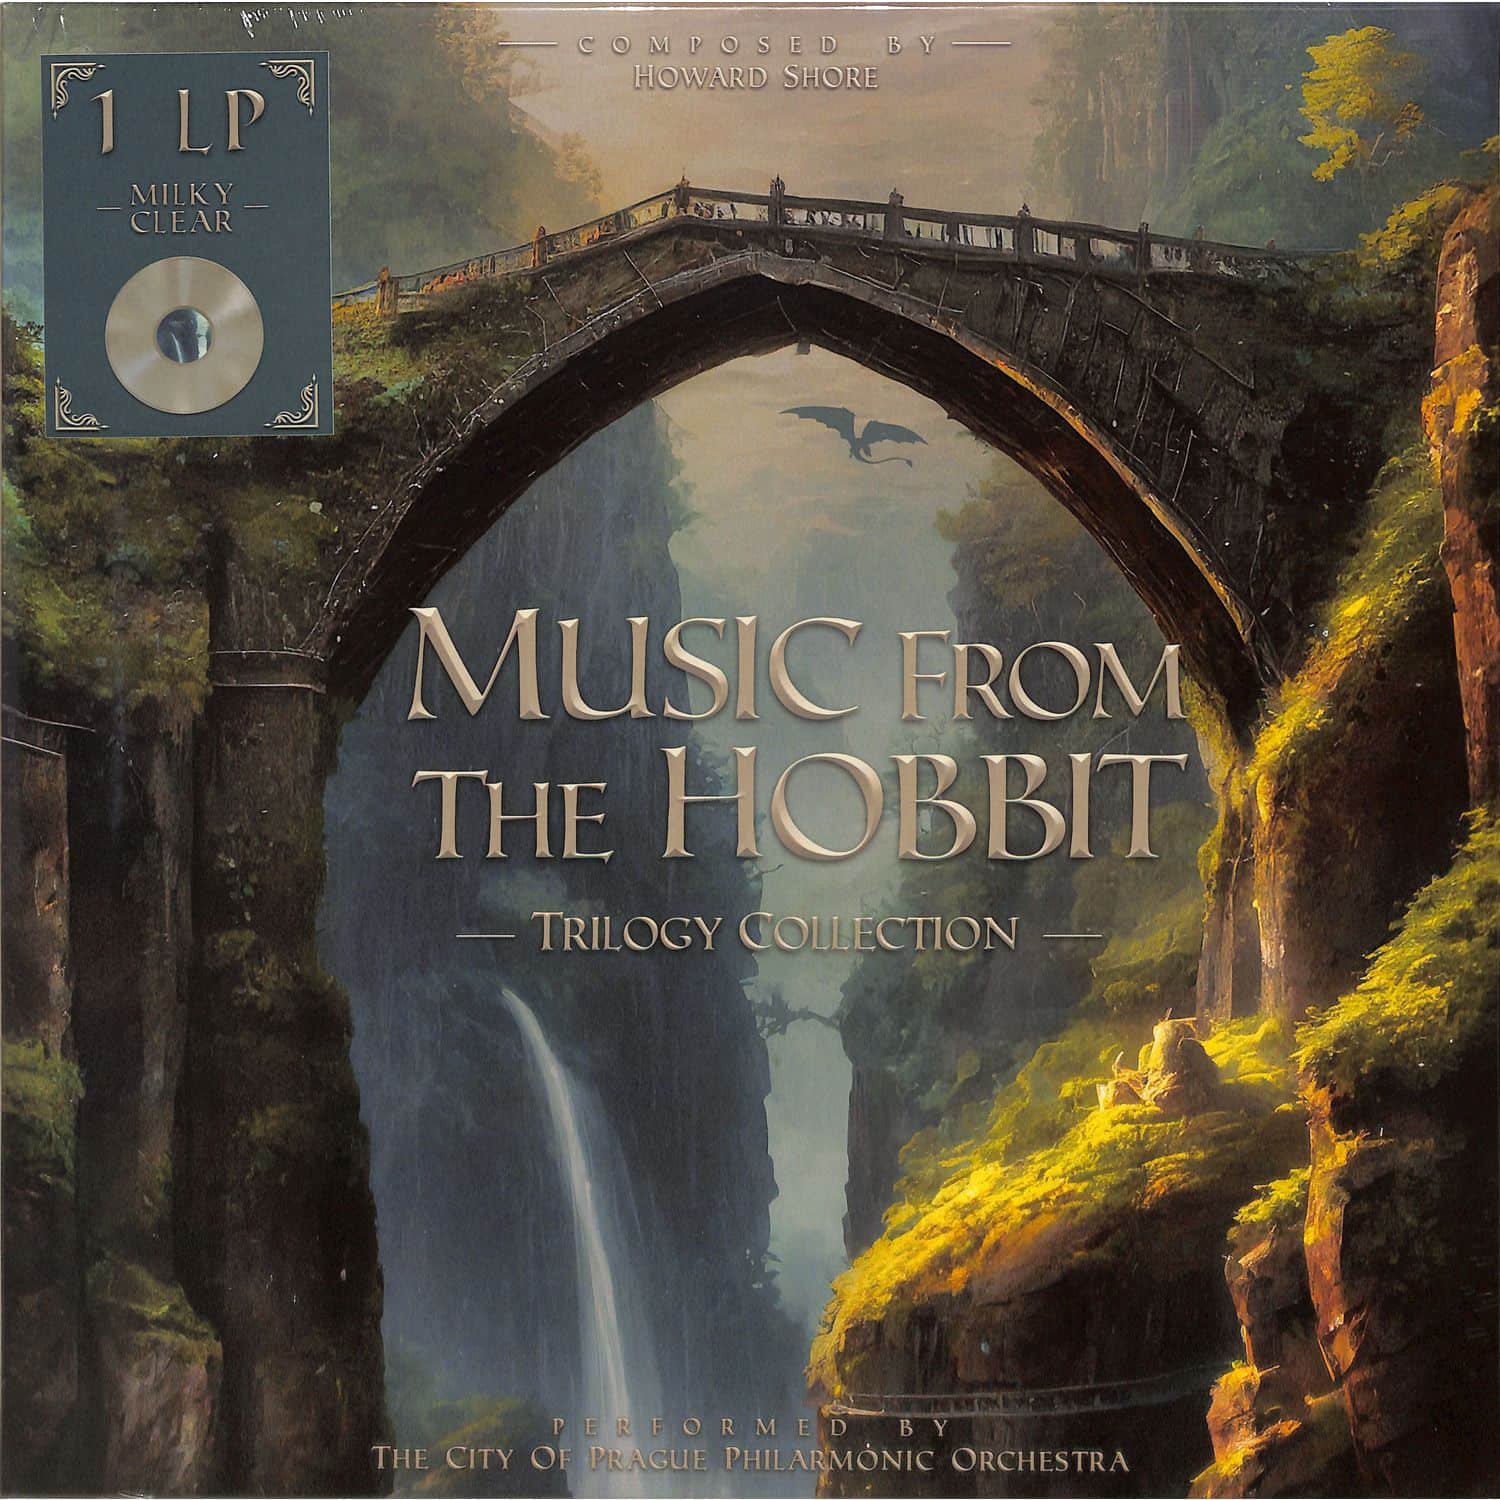 The City Of Prague Philharmonic Orchestra - THE HOBBIT FILM MUSIC COLLECTION 